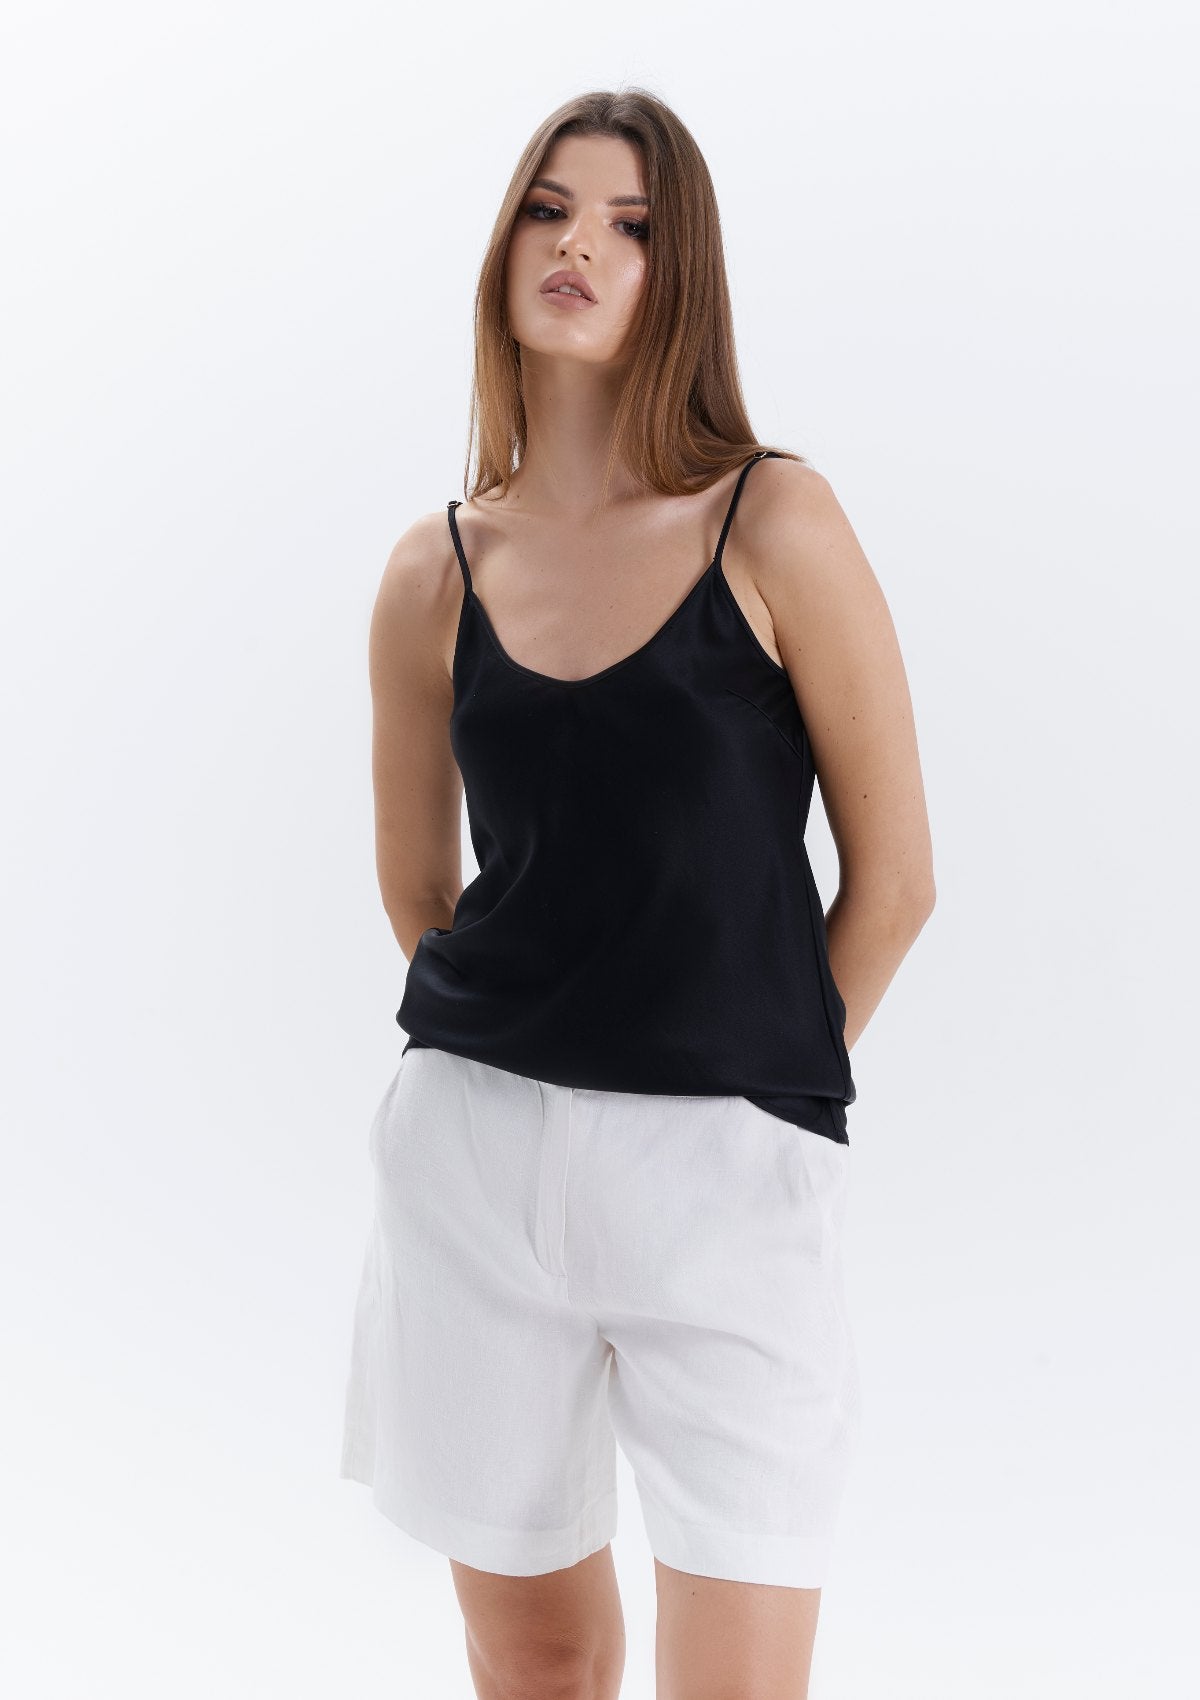 timeless-style-black-silk-camisole-top-by Silk & tonic